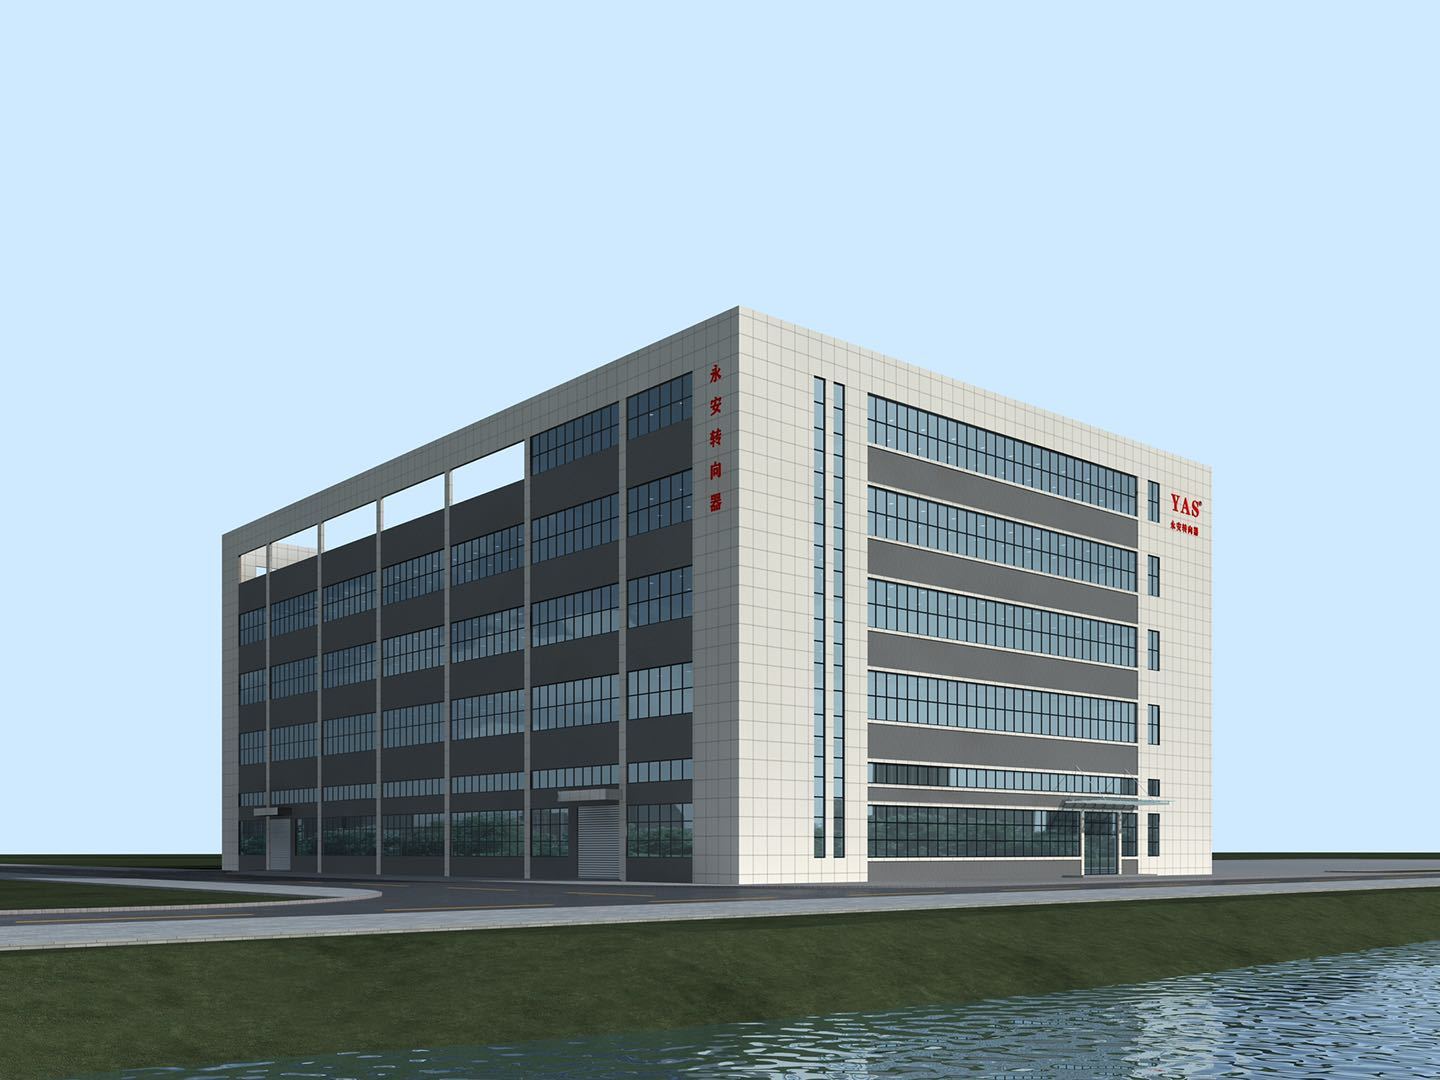 YAS STEERING GEAR COMPANY will have NO.6 office building in 2022